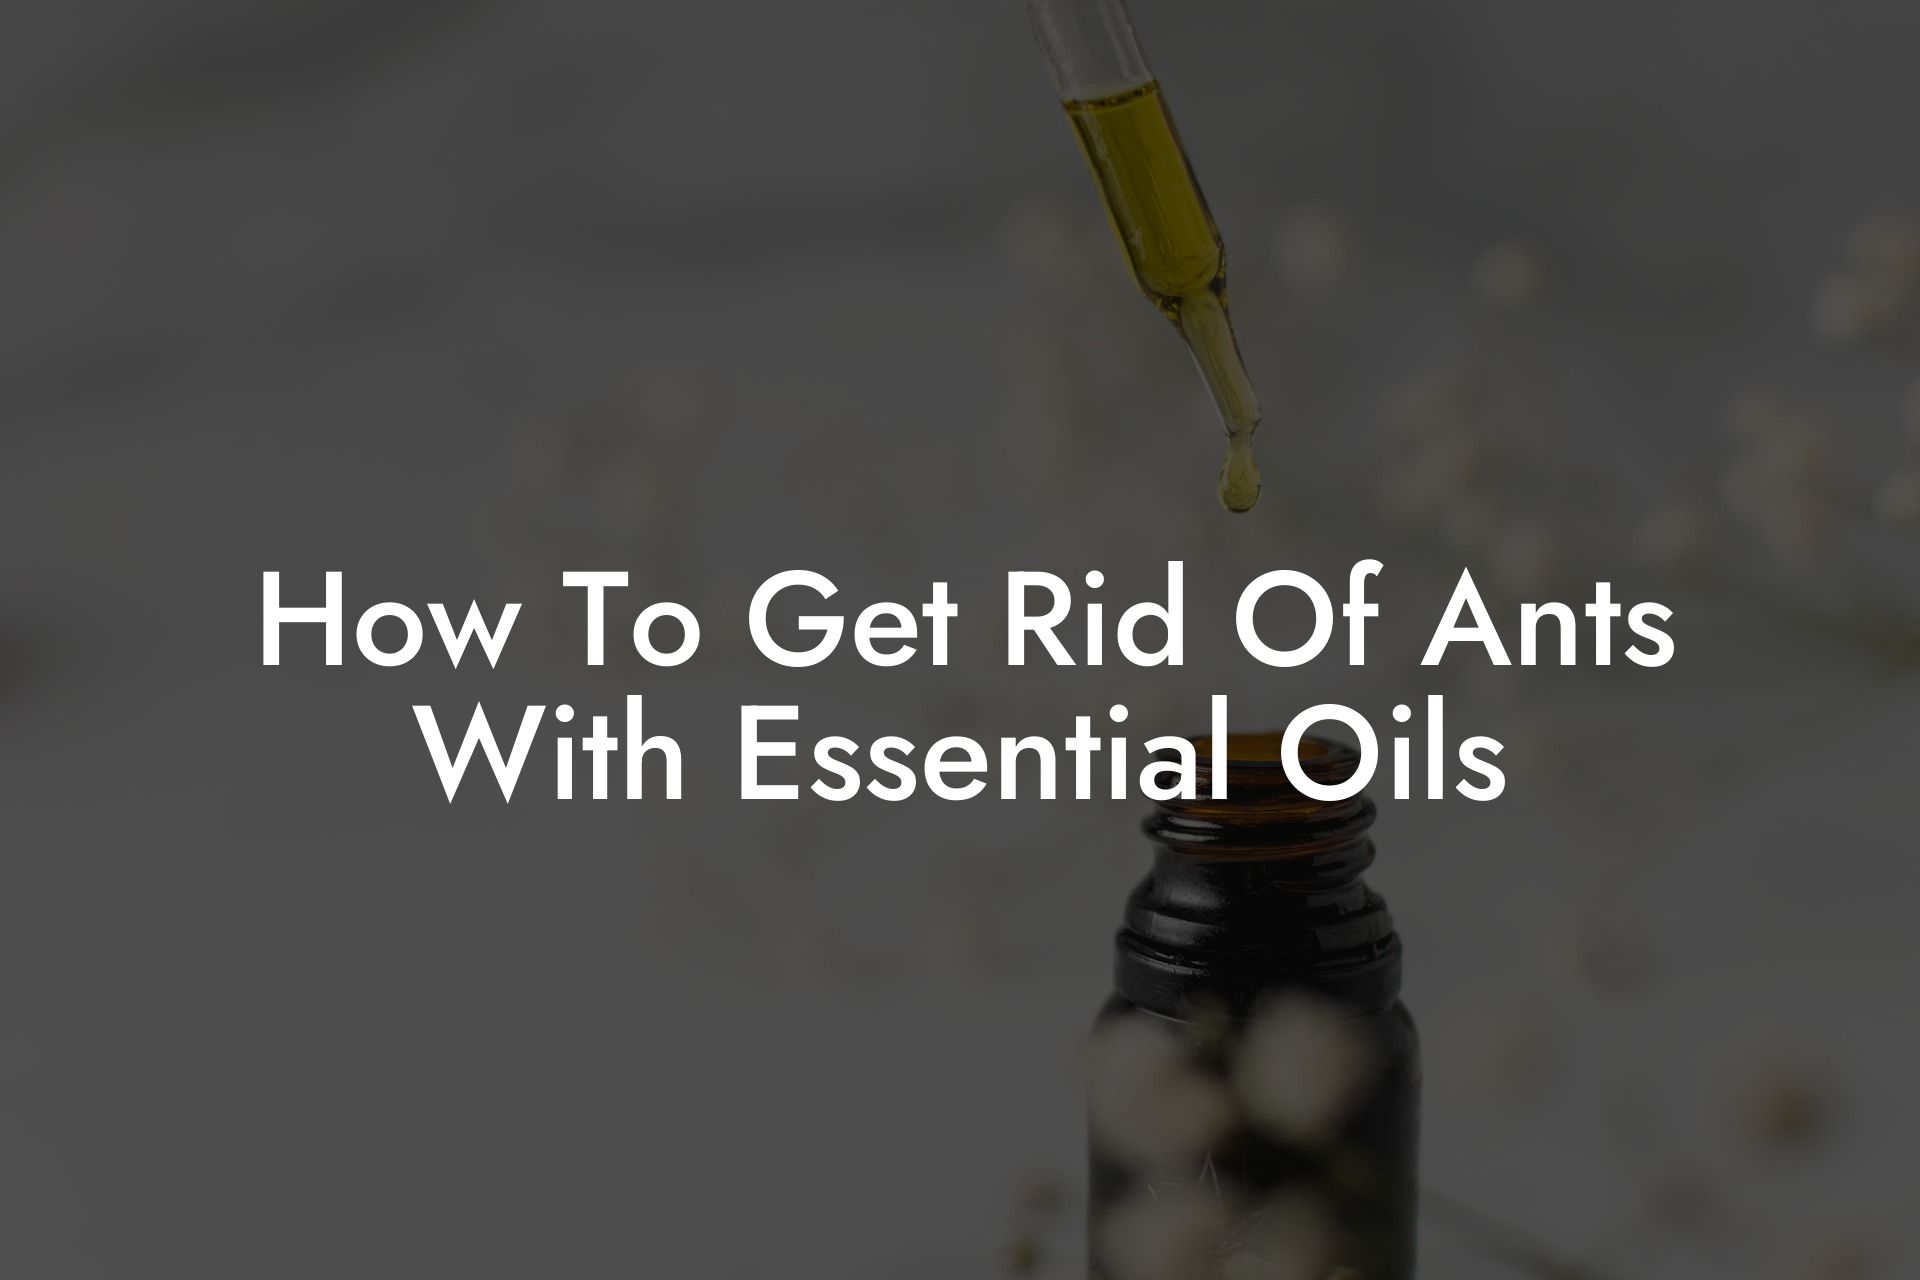 How To Get Rid Of Ants With Essential Oils